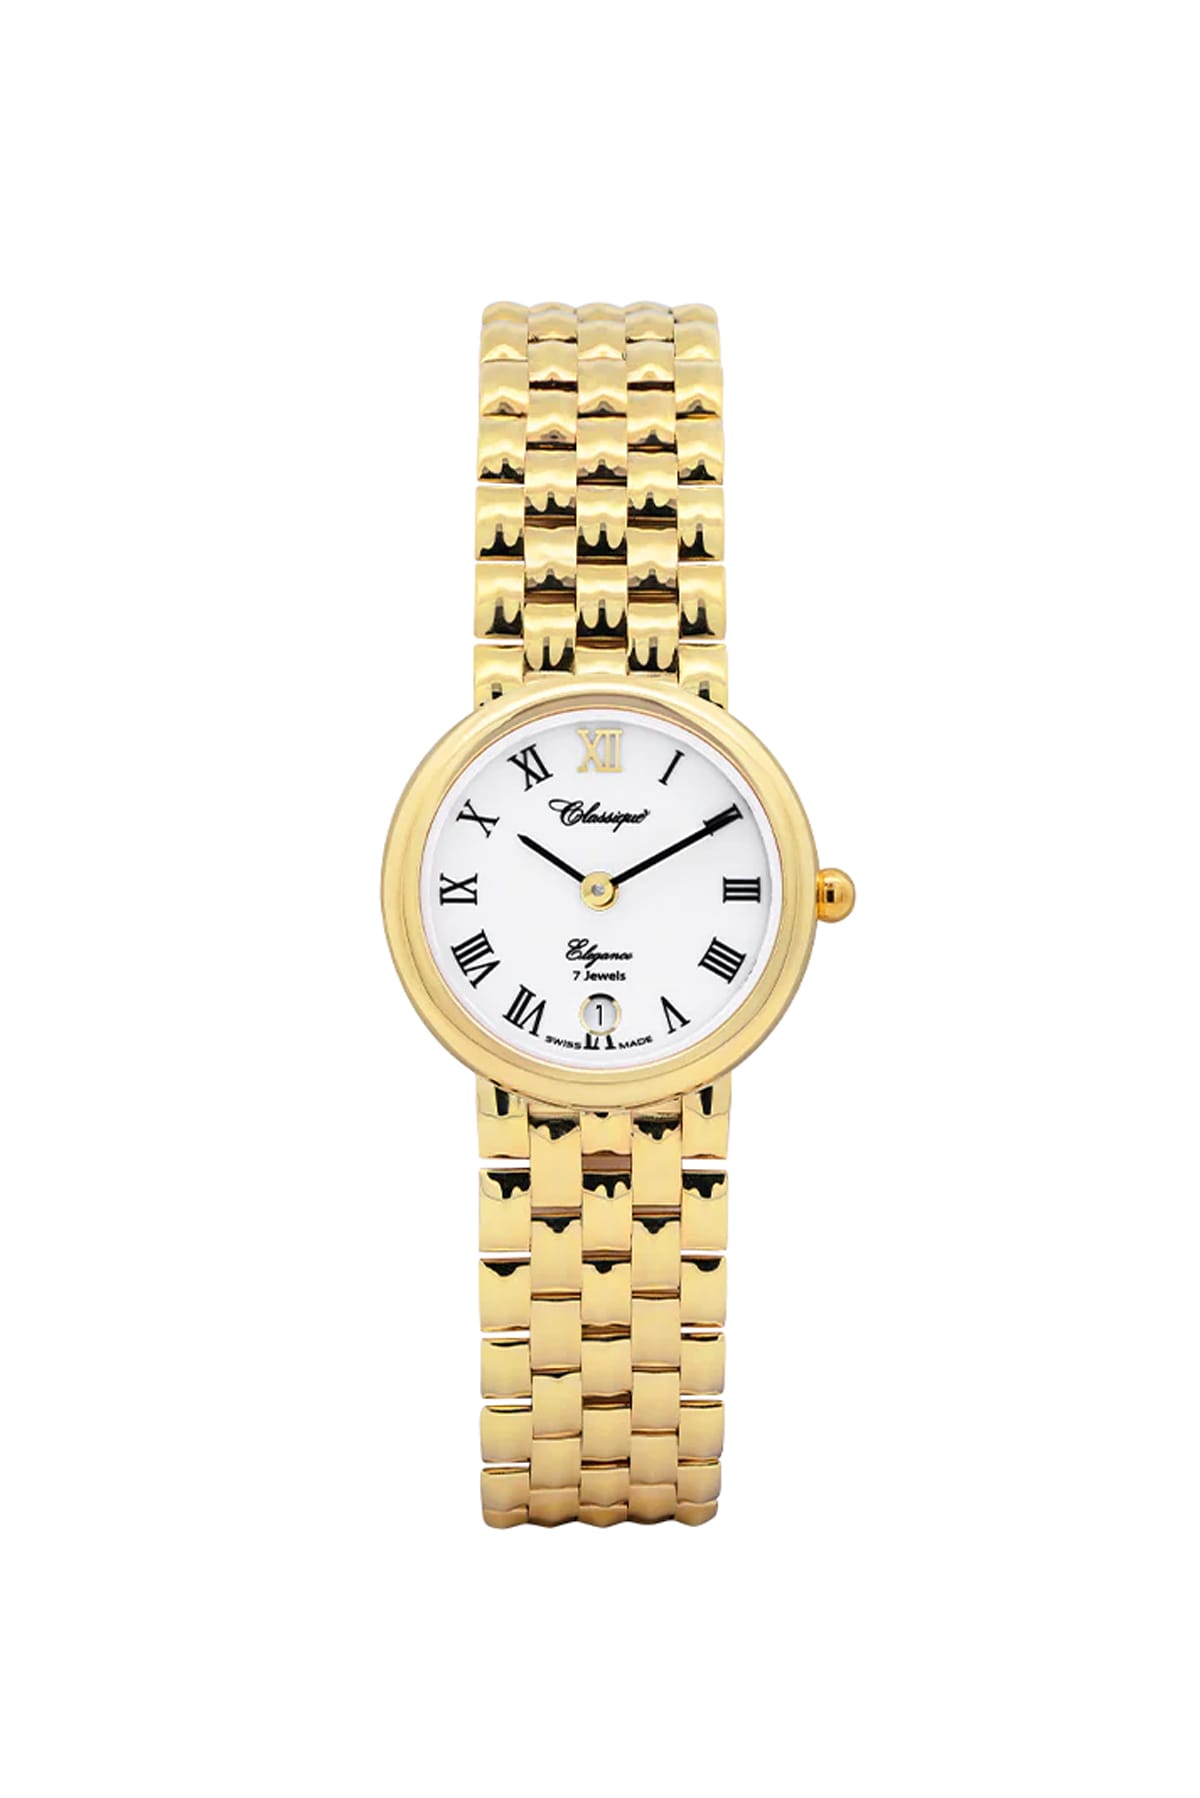 Alessia 9ct Solid Yellow Gold White Dial Classique Swiss Watch available at LeGassick Diamonds and Jewellery Gold Coast, Australia.